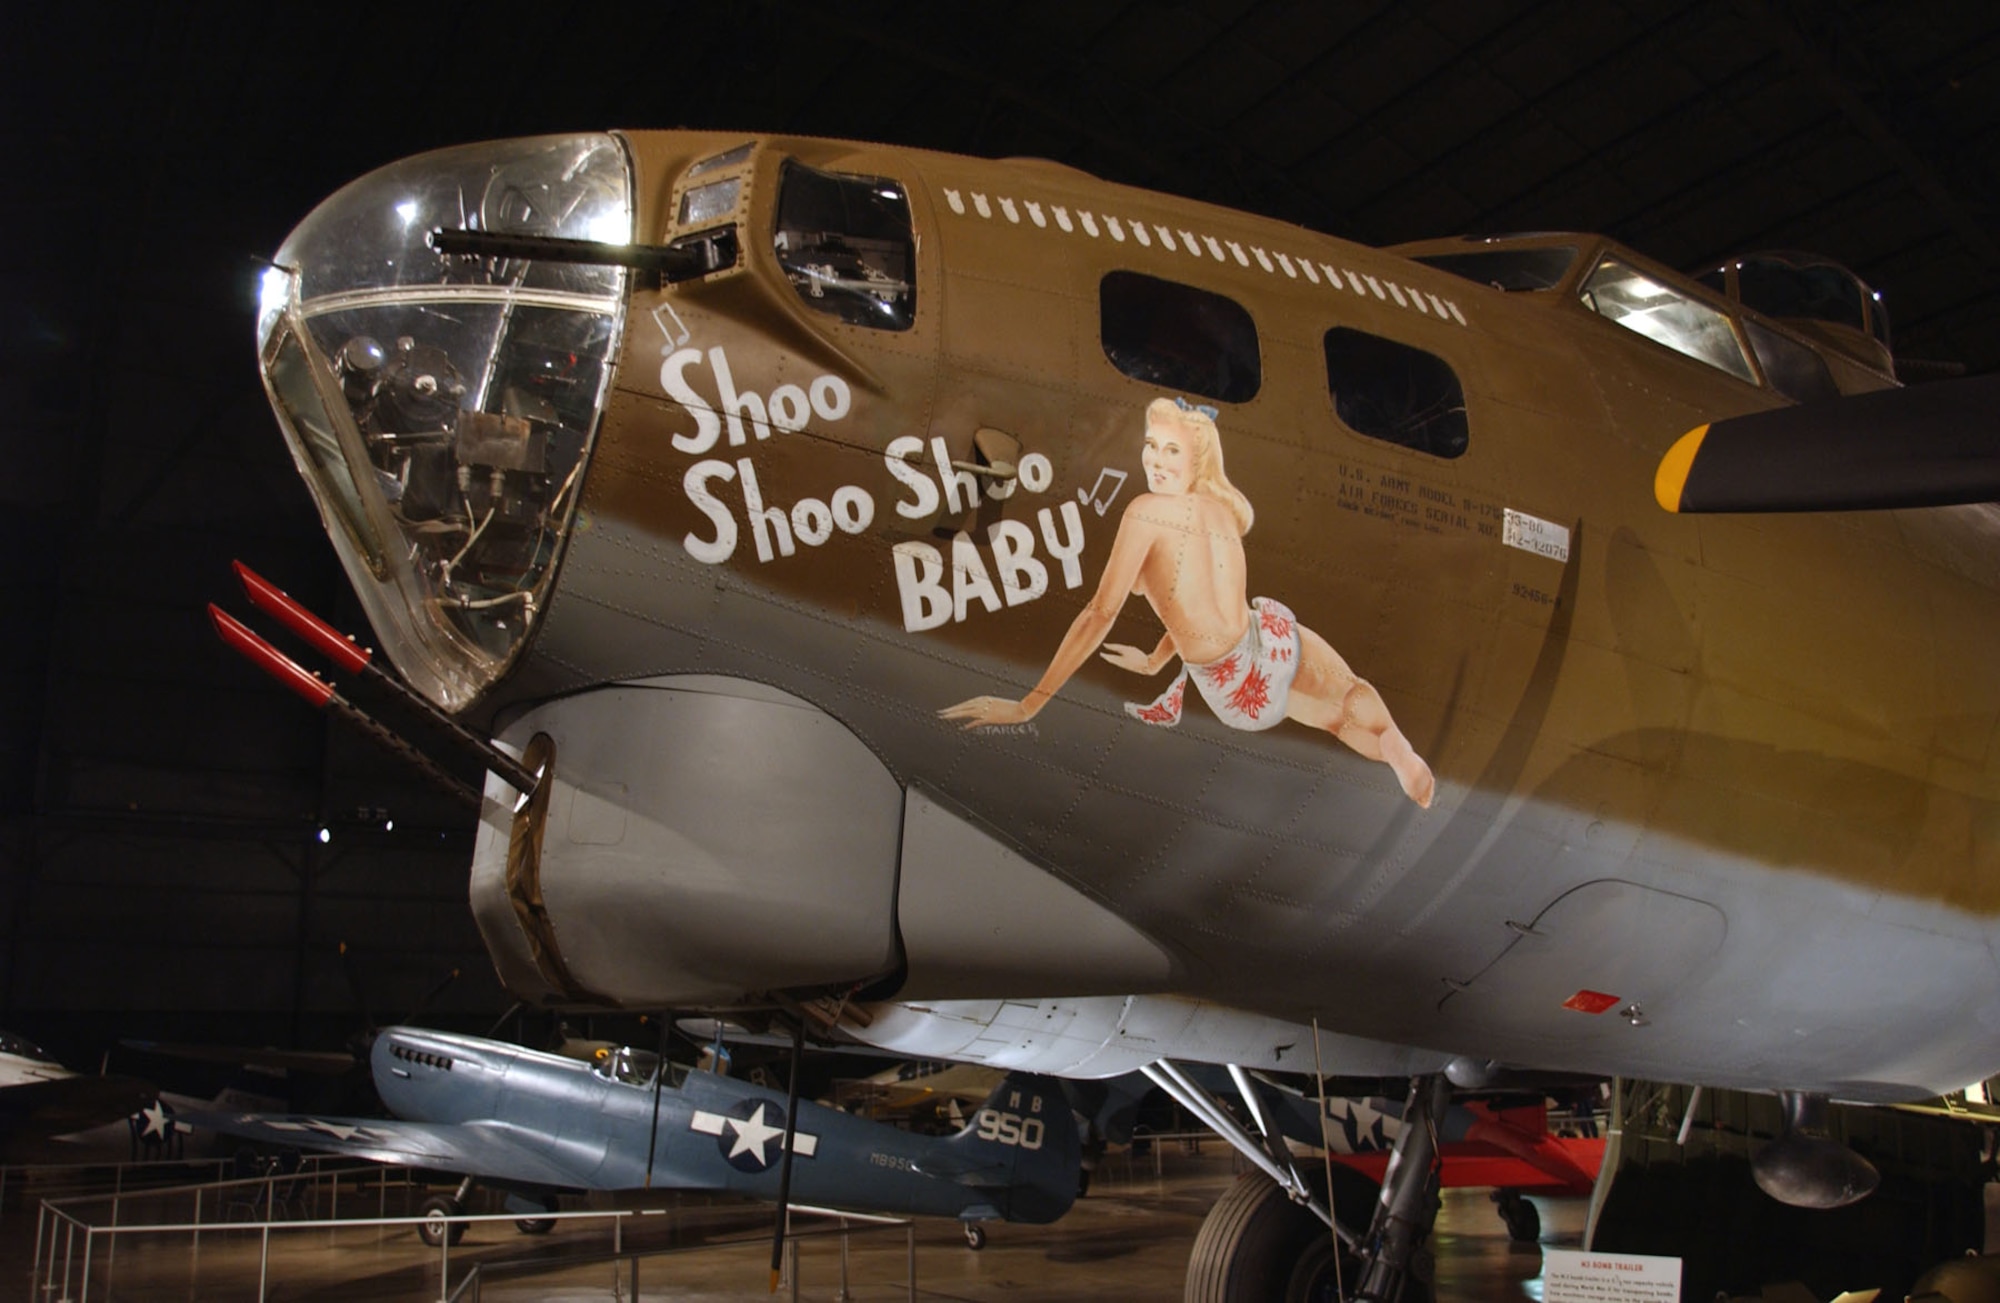 DAYTON, Ohio -- Boeing B-17G Flying Fortress in the World War II Gallery at the National Museum of the United States Air Force. (U.S. Air Force photo)